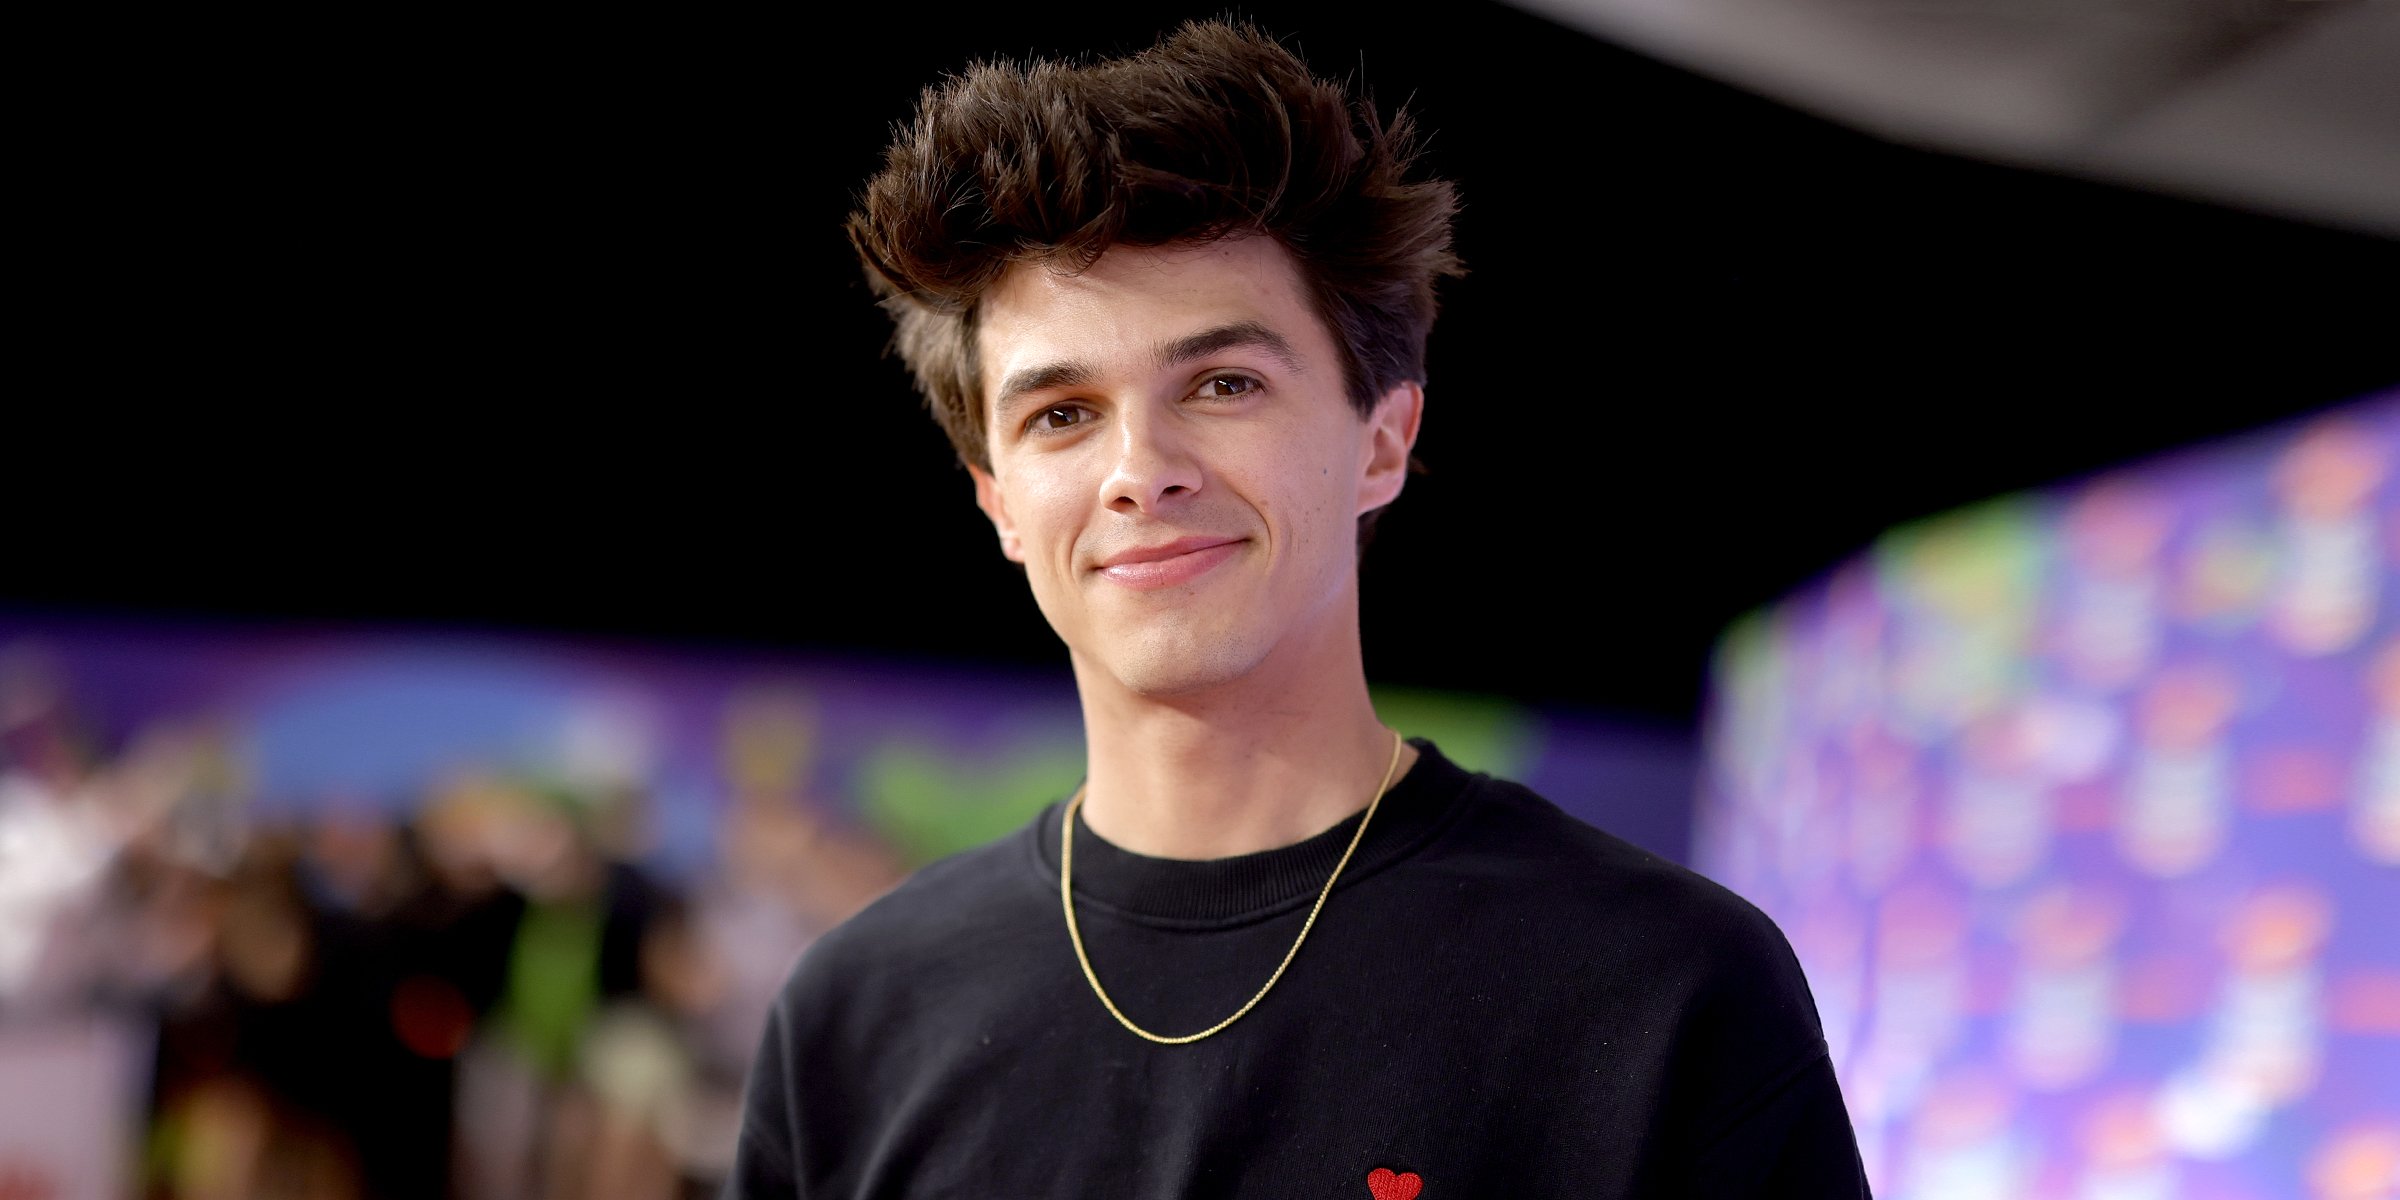 Brent Rivera | Source: Getty Images